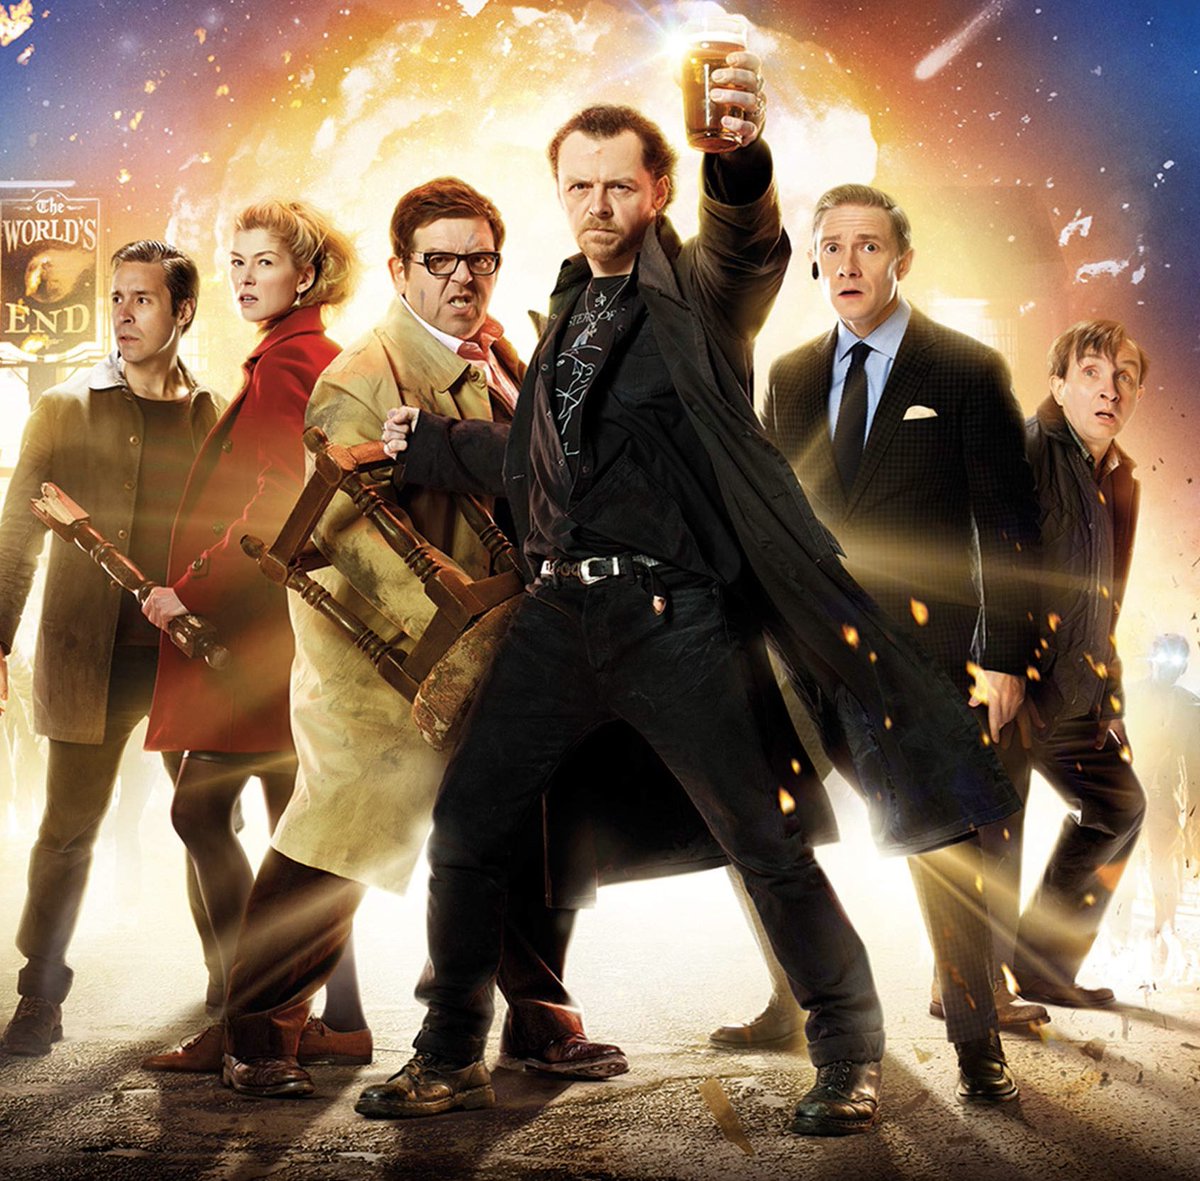 Simon Pegg says ‘THE WORLD’S END’ is his favorite movie in the Cornetto trilogy.

“It’s the least audience friendly. It’s the darkest of the three. It’s the most challenging.”

See the full details: bit.ly/SimonDF